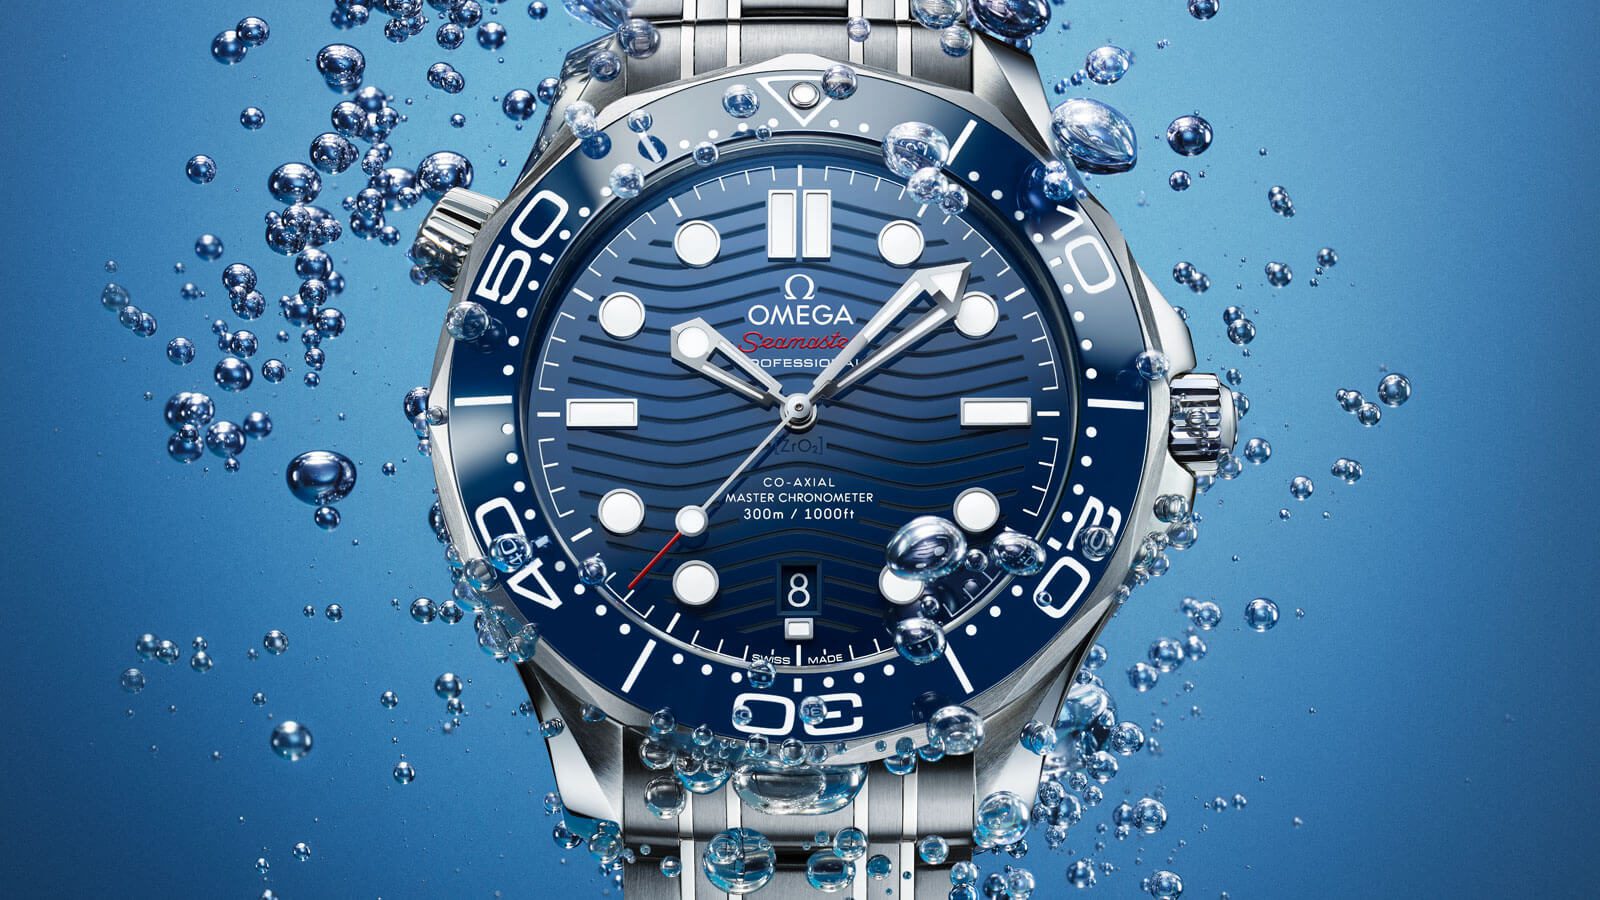 Shop Omega Seamaster watches online in Australia